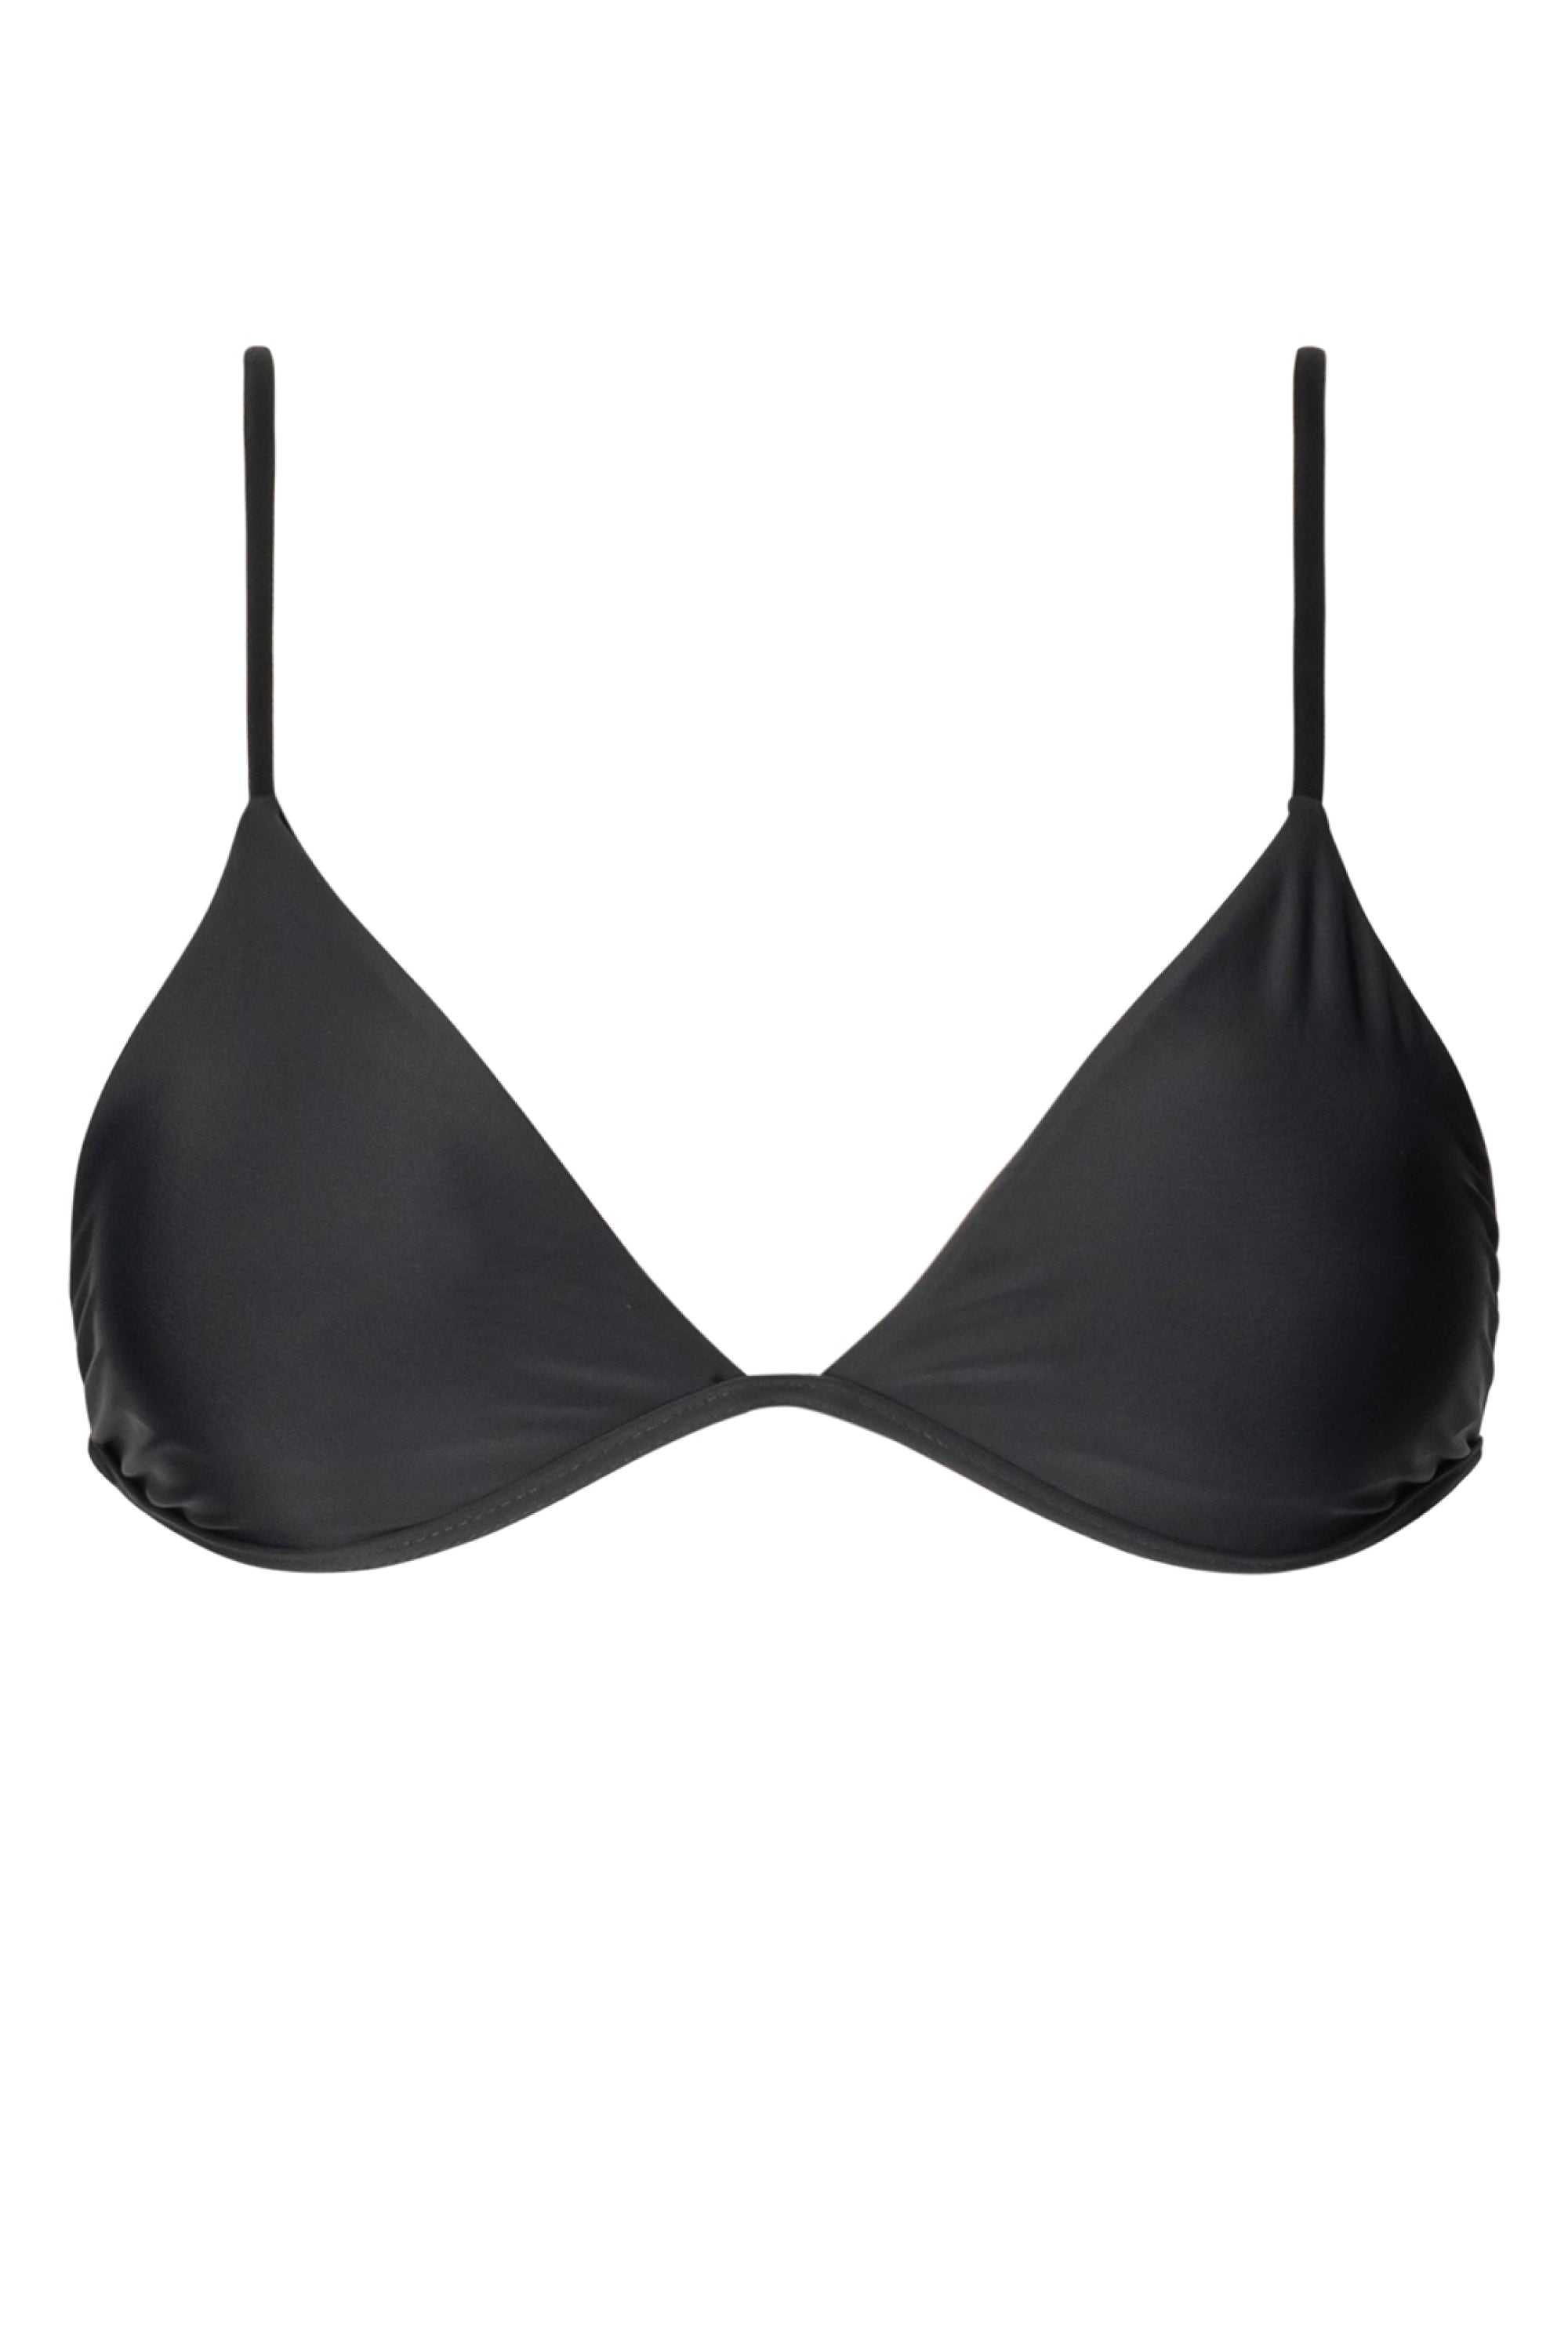 Graduated Padded Triangle Swimsuit Top 3D Black Waves - Calzedonia